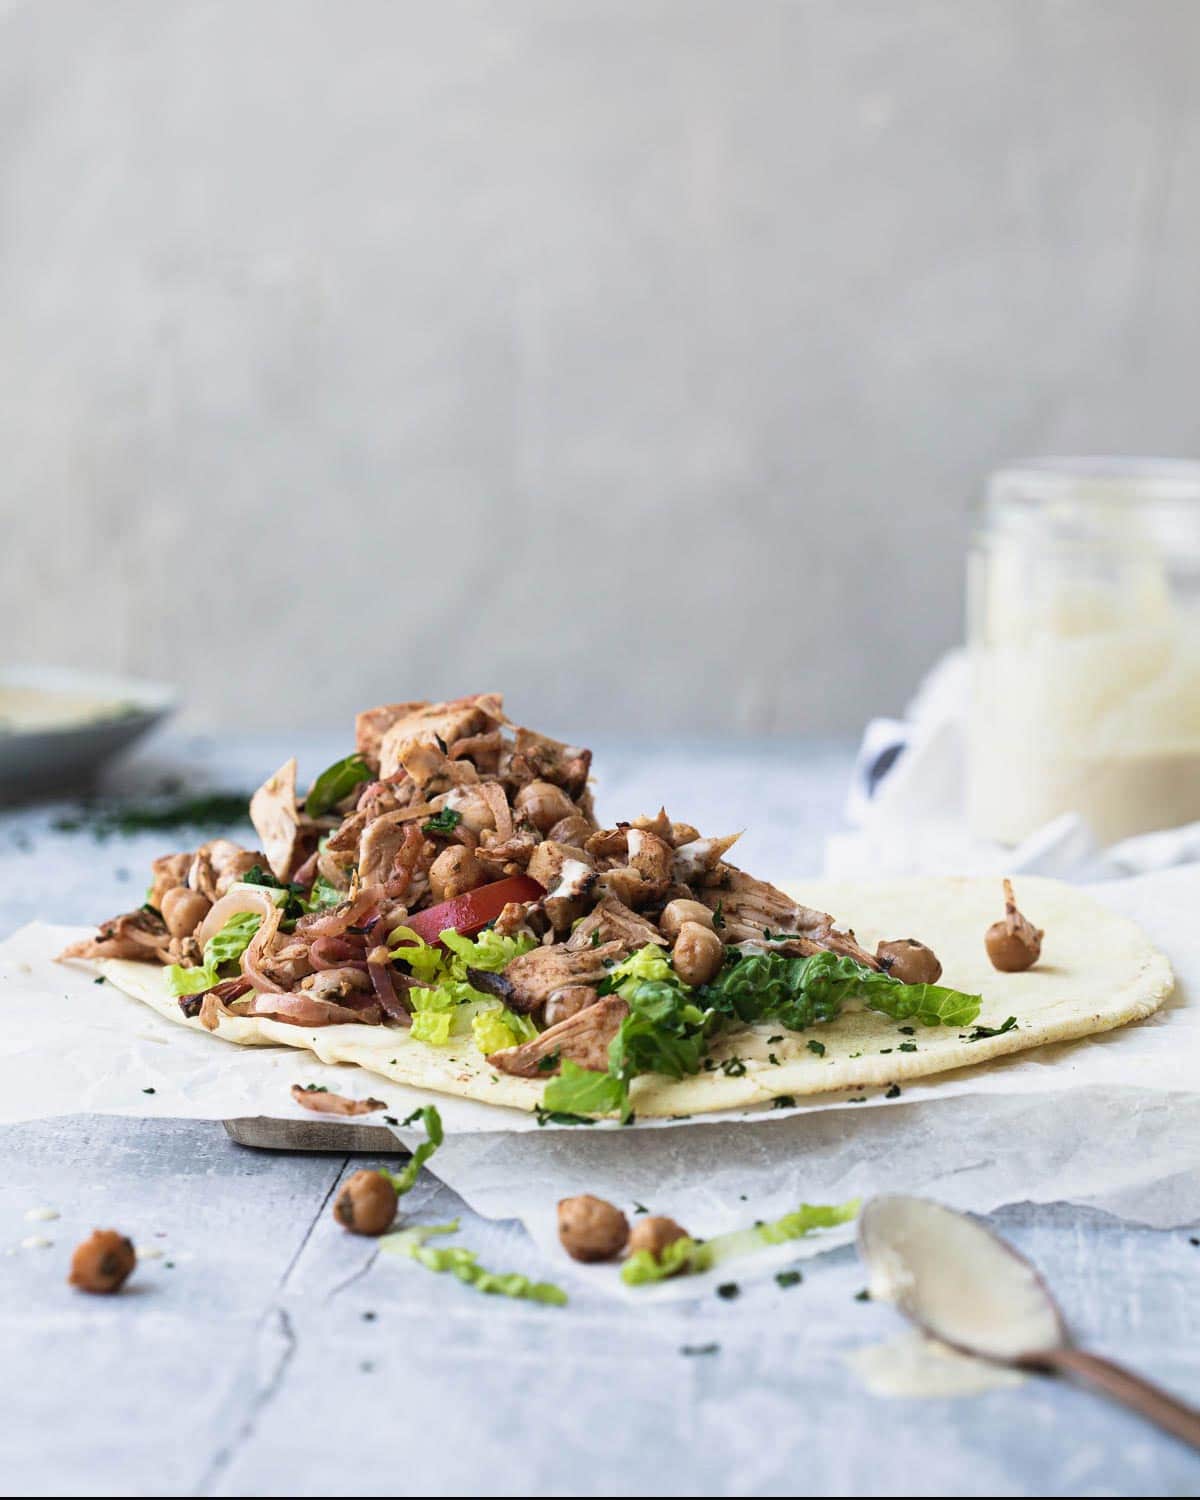 A pita topped with vegan meat and chickpeas.